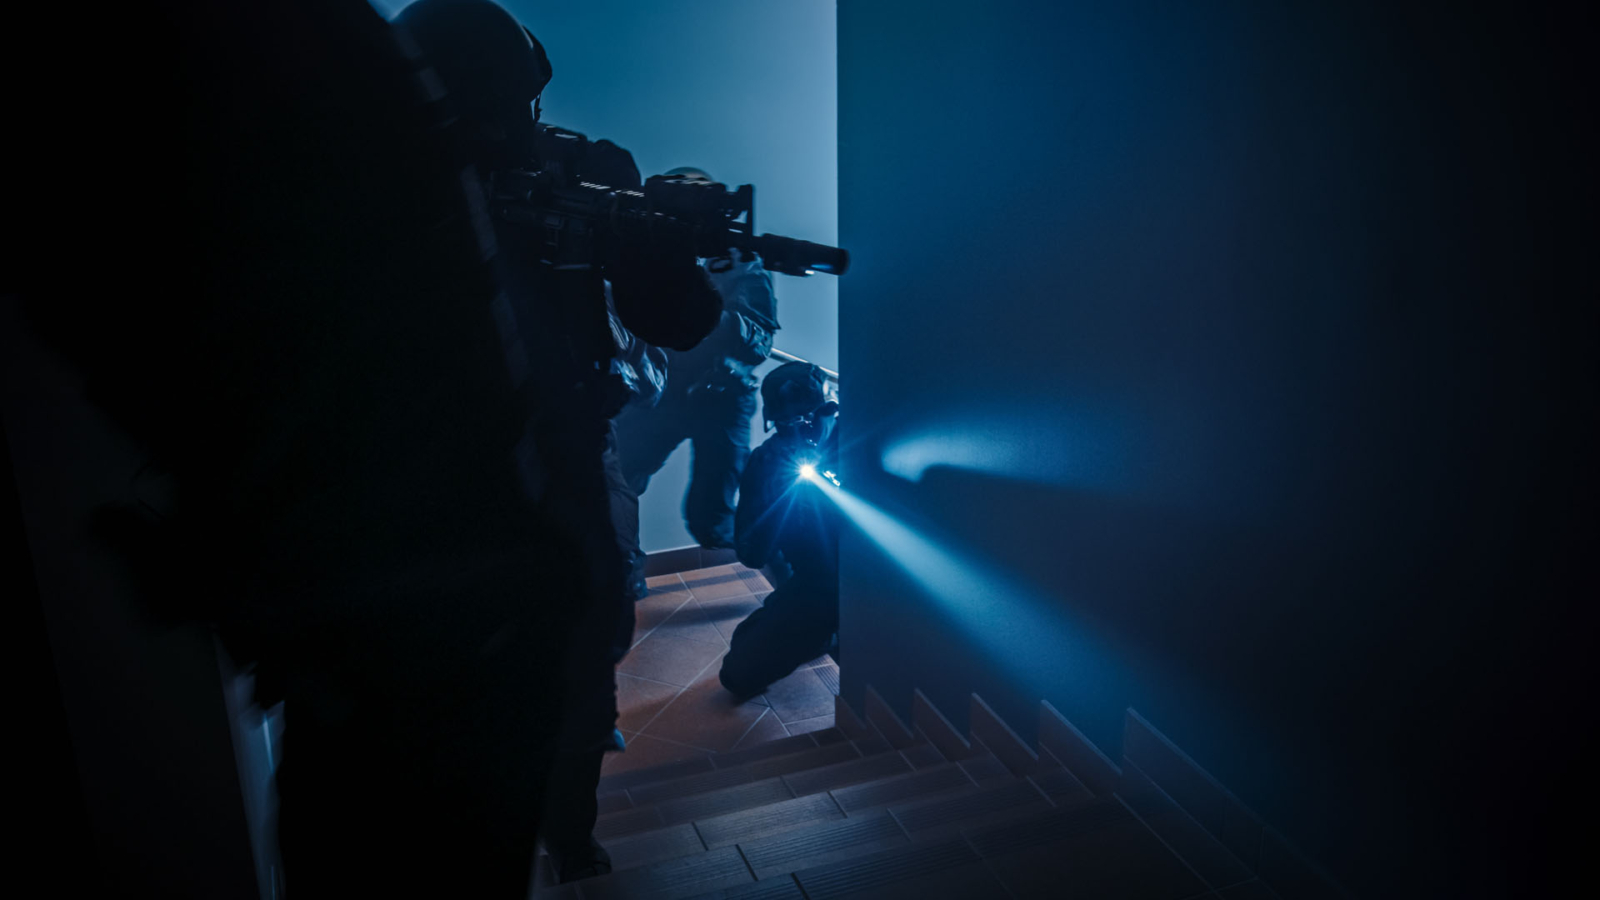 Masked Squad of Armed SWAT Police Officers Move Up the Stairs in a Corridor of an Office Building. Soldiers with Rifles and Flashlights Move Forwards and Cover Surroundings.